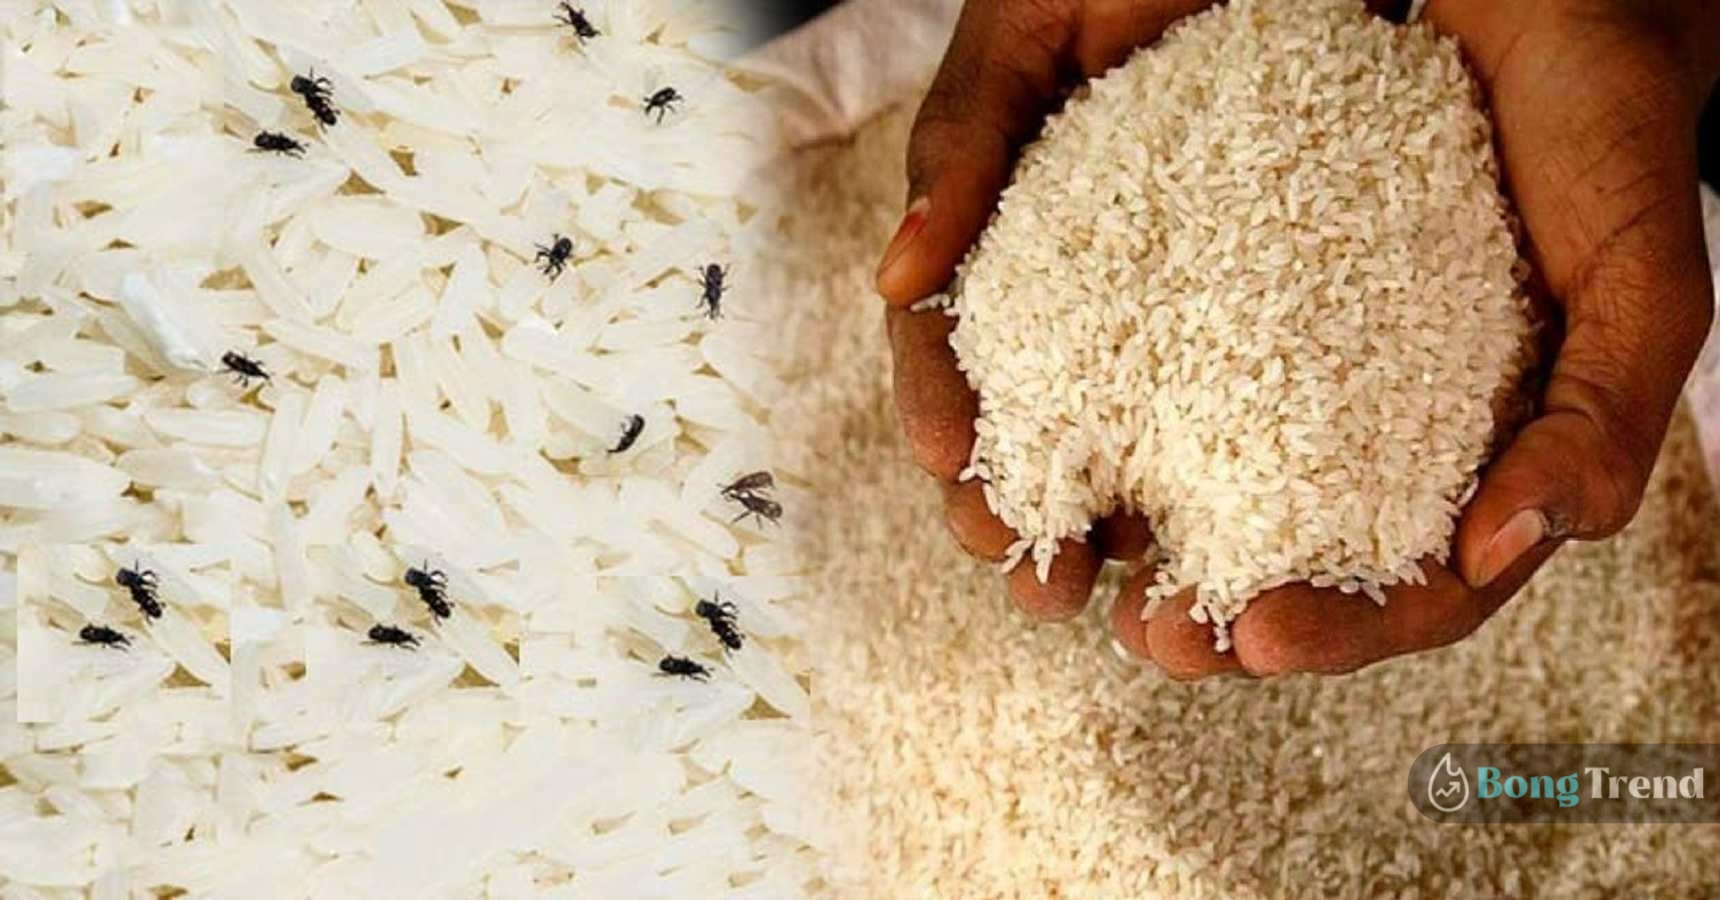 How to keep rice free of insects